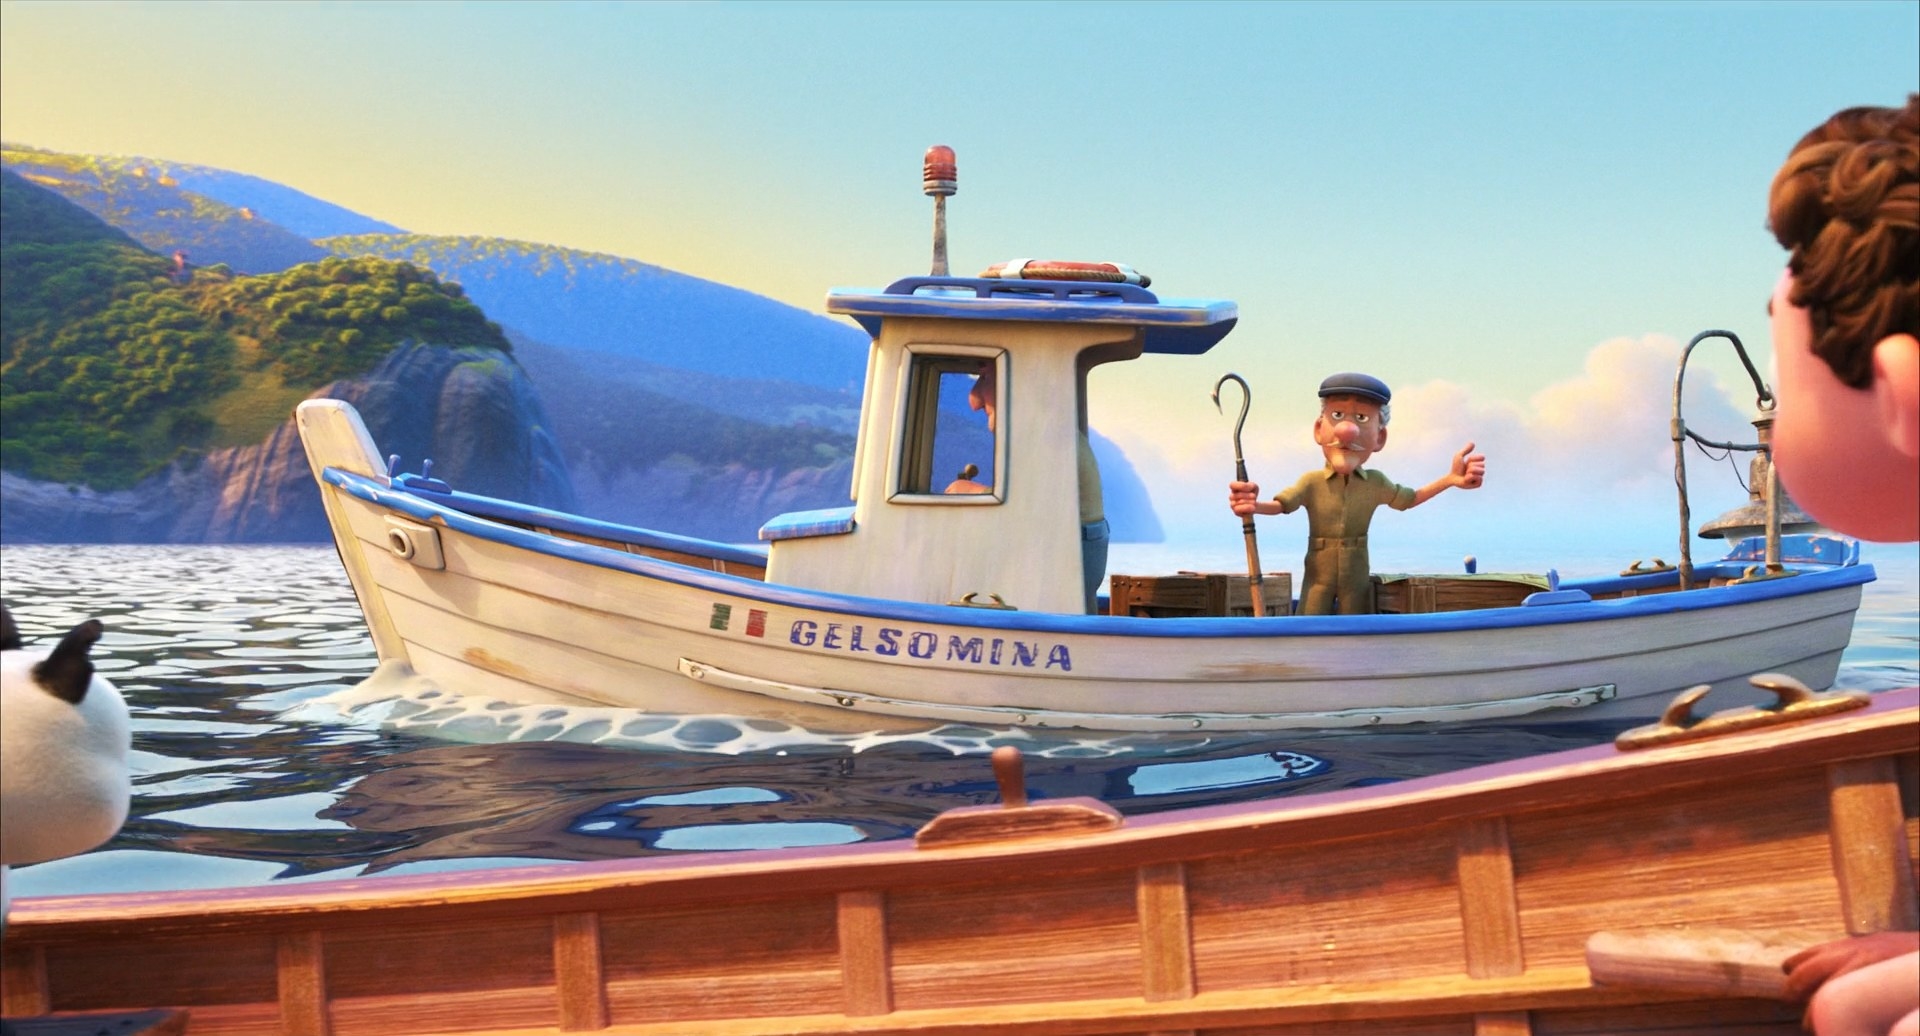 Easter Eggs And Details From Pixar's "Luca"